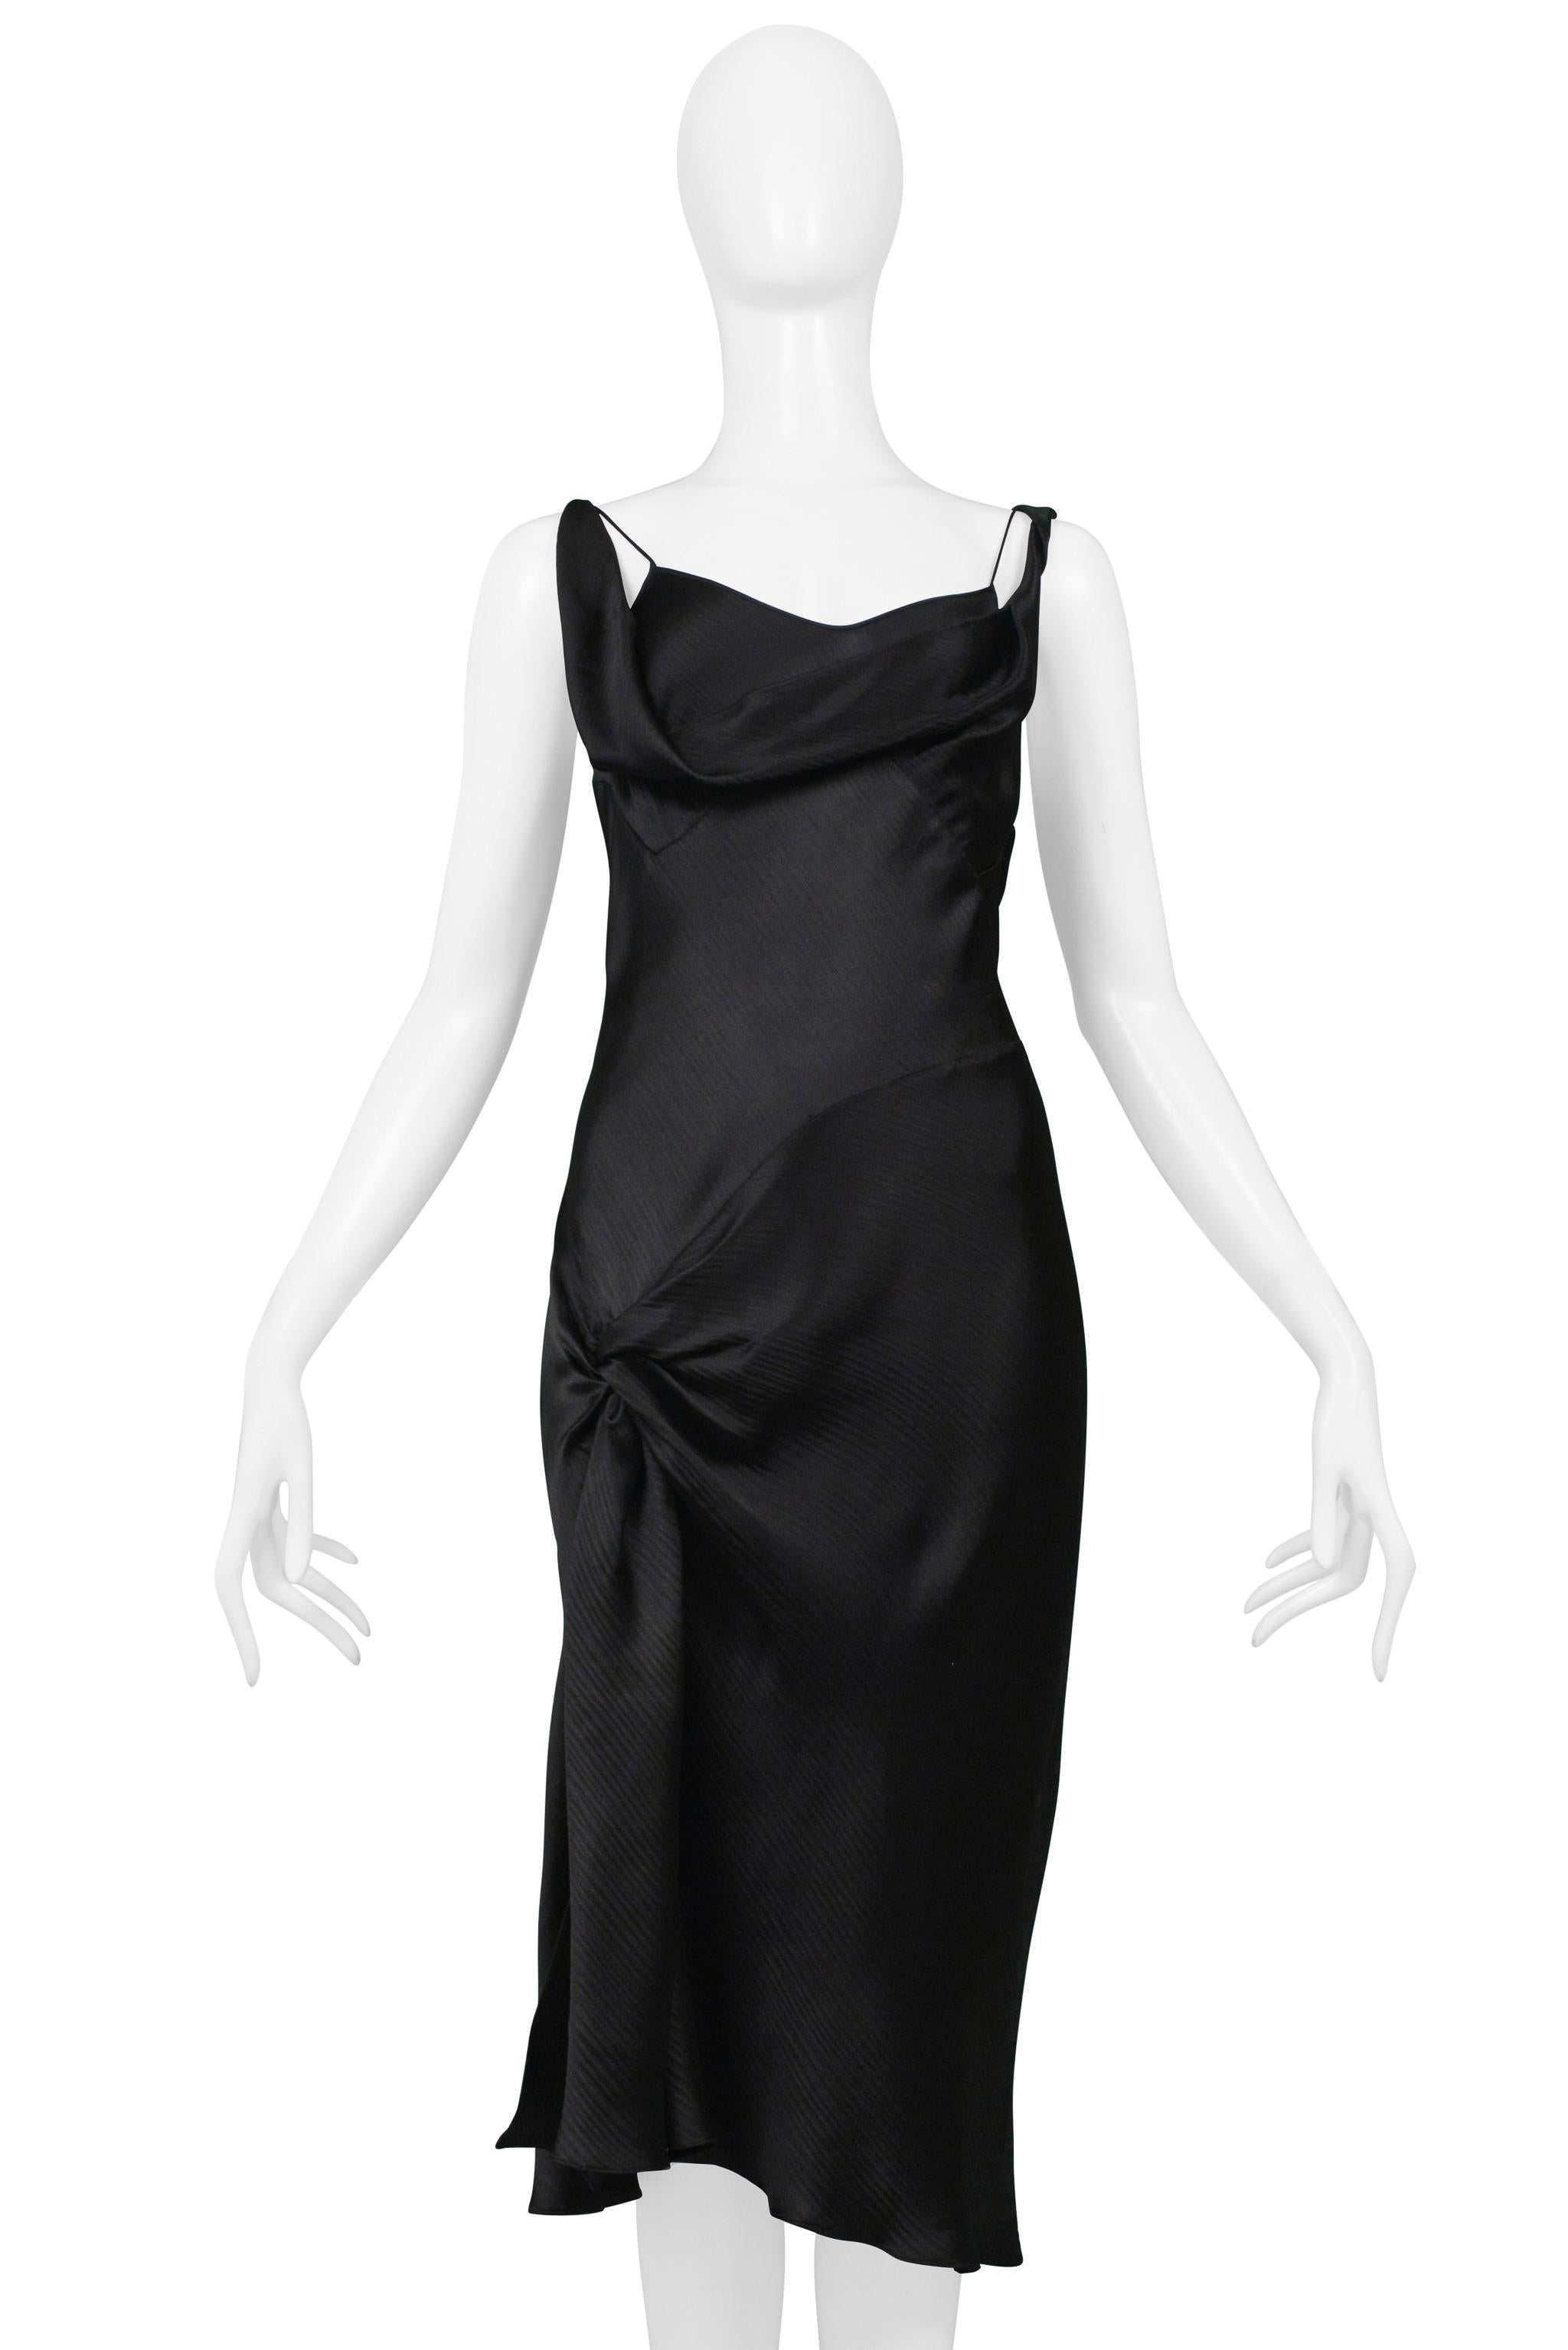 Women's Stunning John Galliano Black Satin Slip Dress with Hip Knot and Slit 1990s For Sale